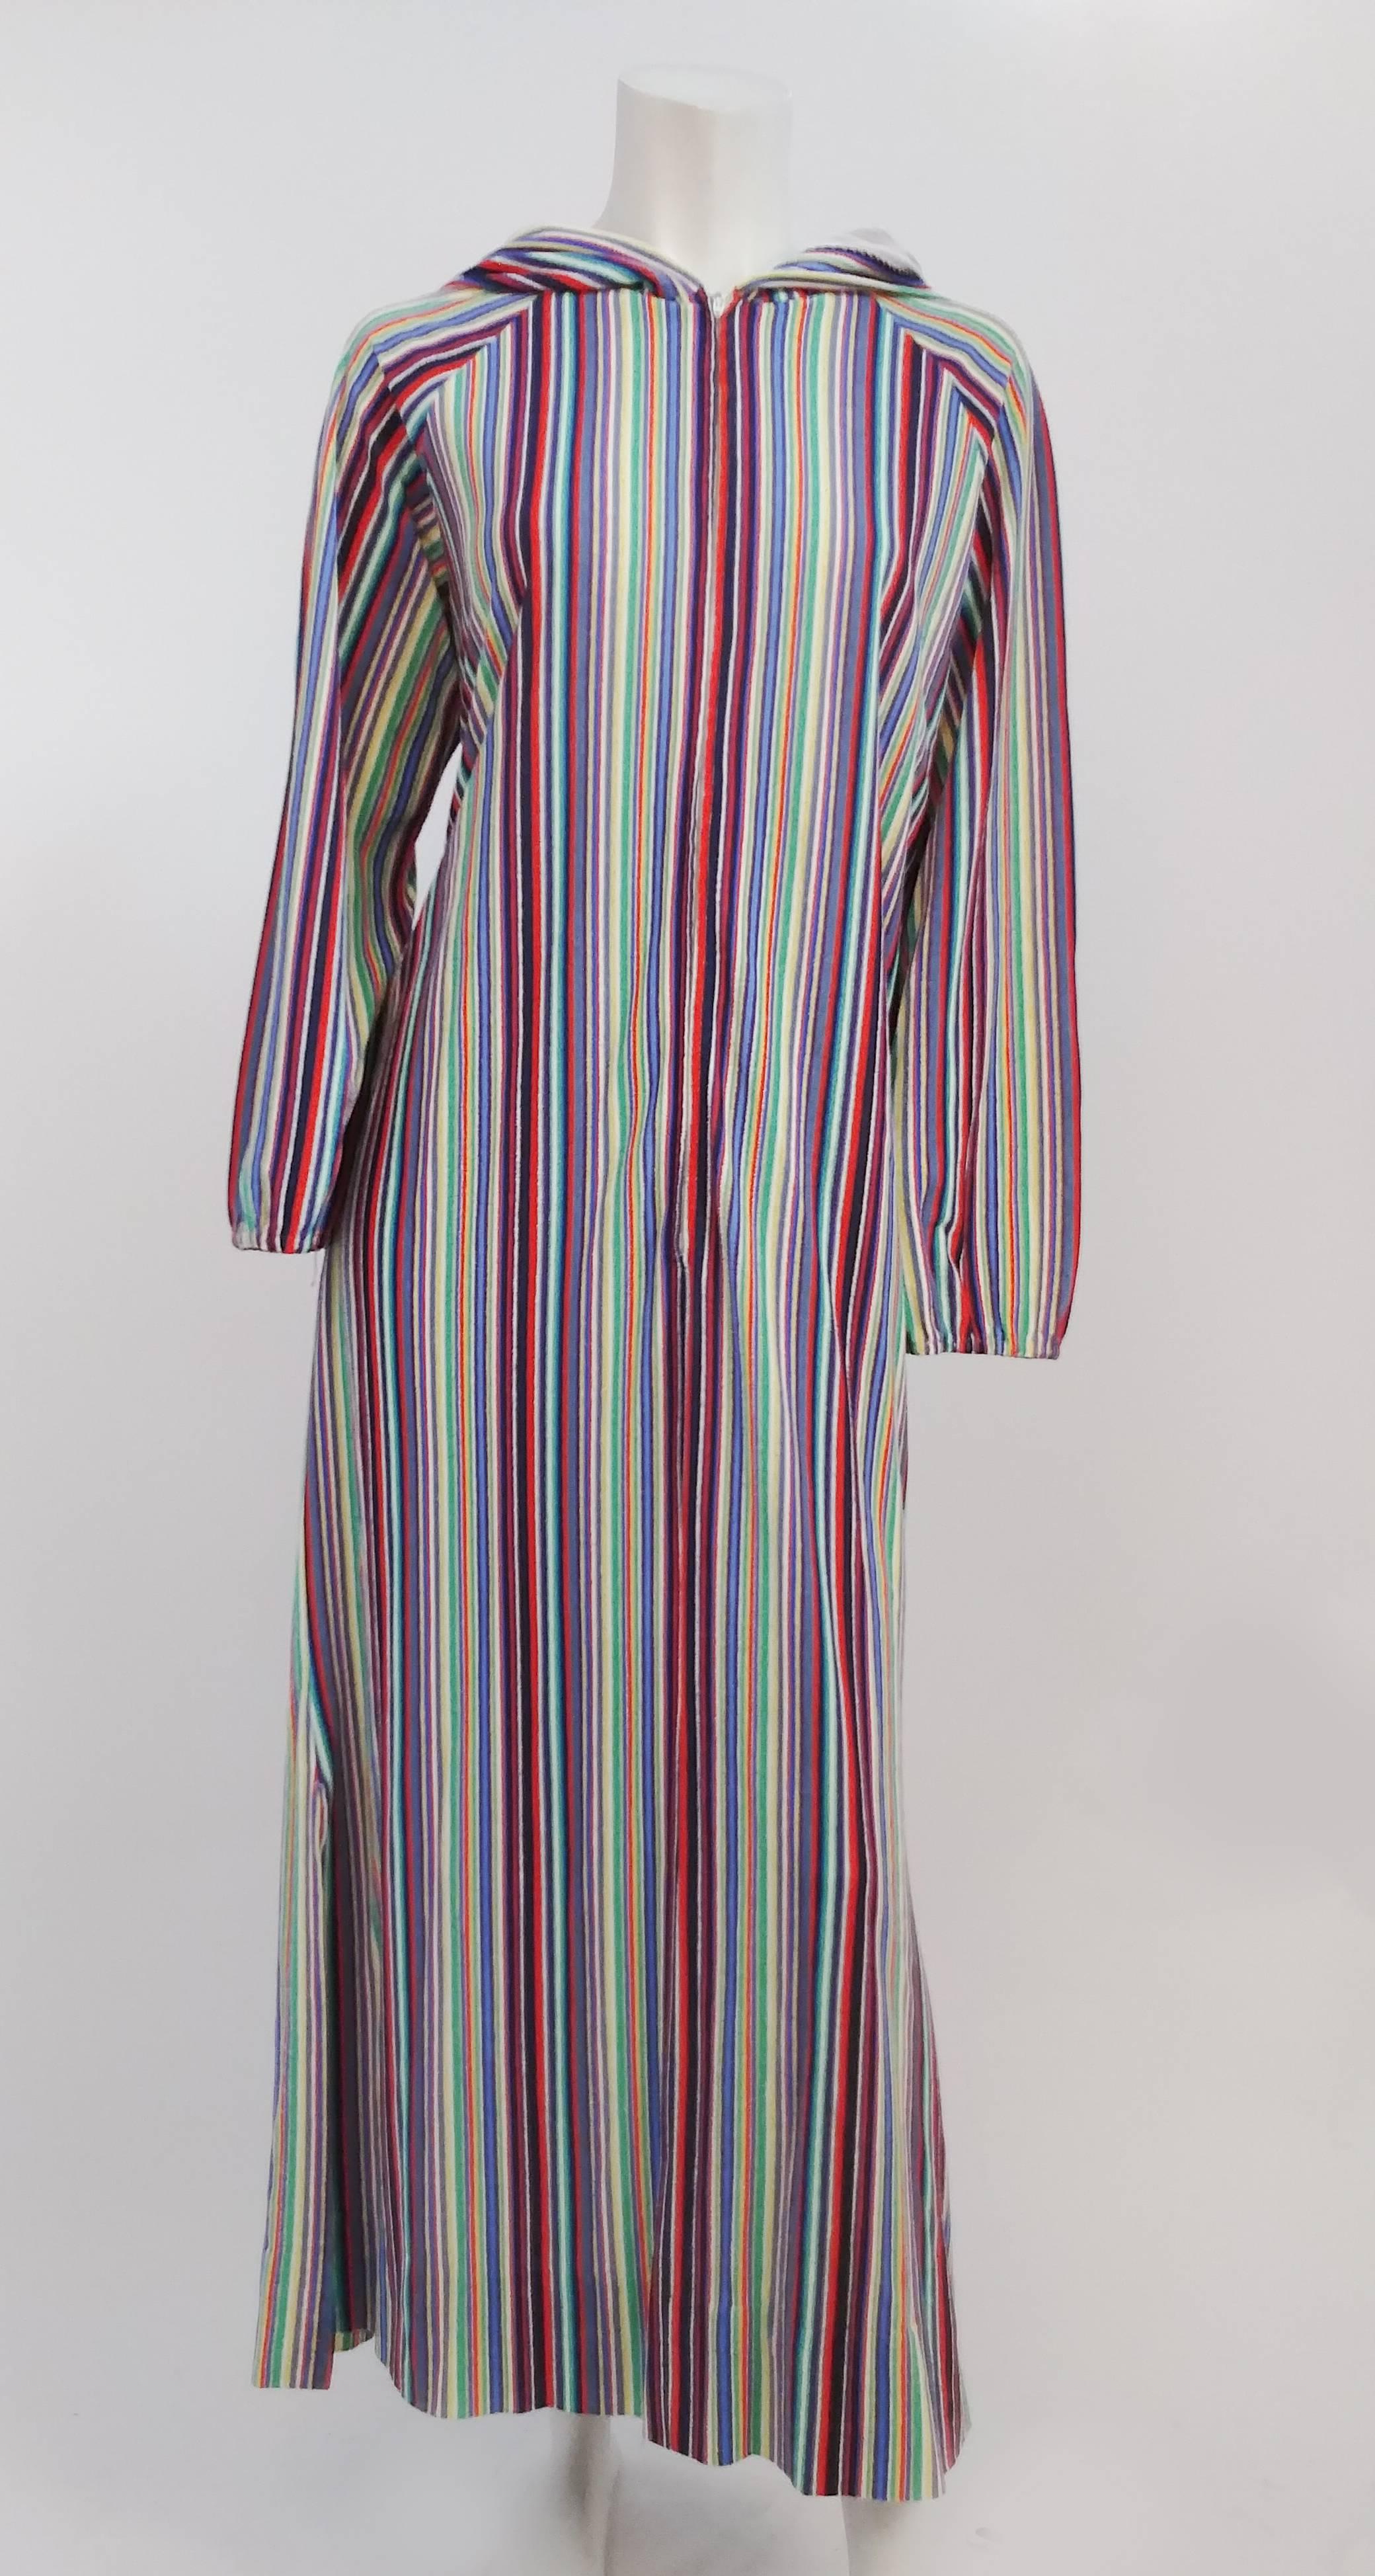 1970s Striped Hooded Coverup. Zip up font. Terrycloth.